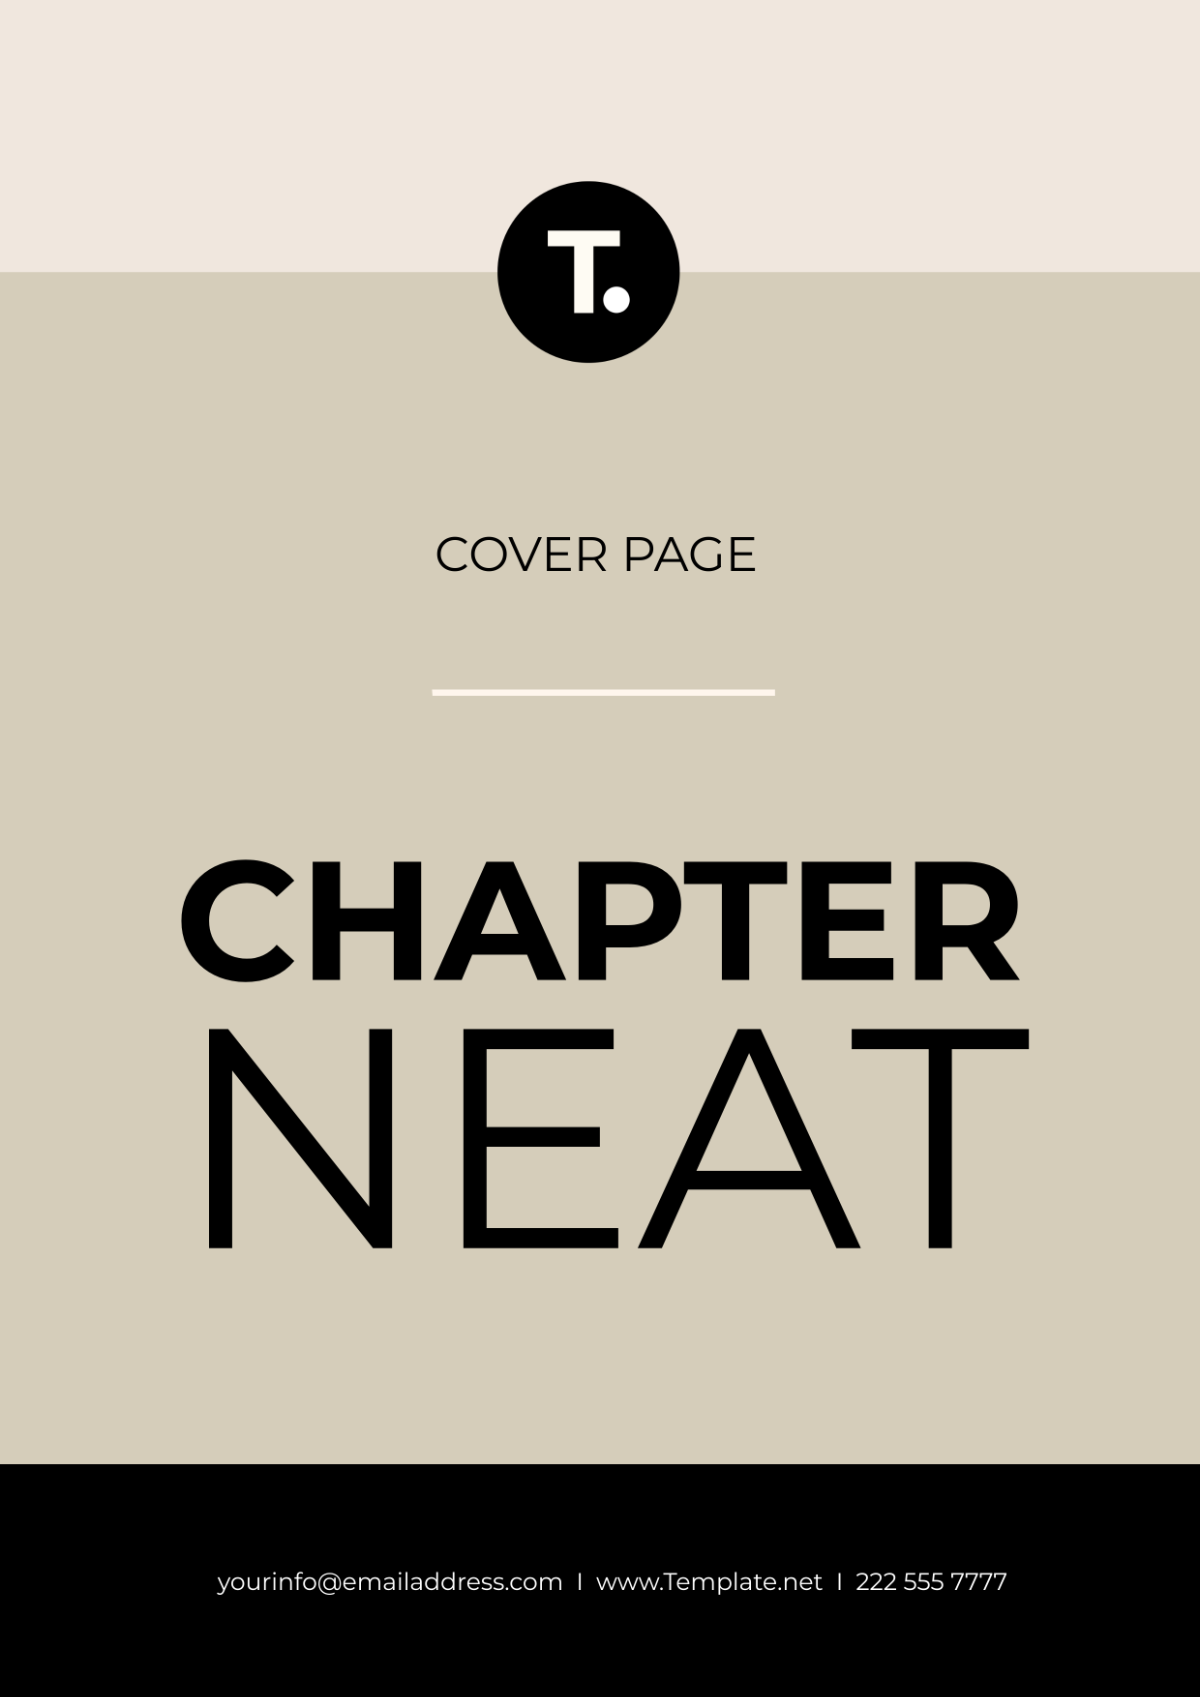 Chapter Neat Cover Page Template